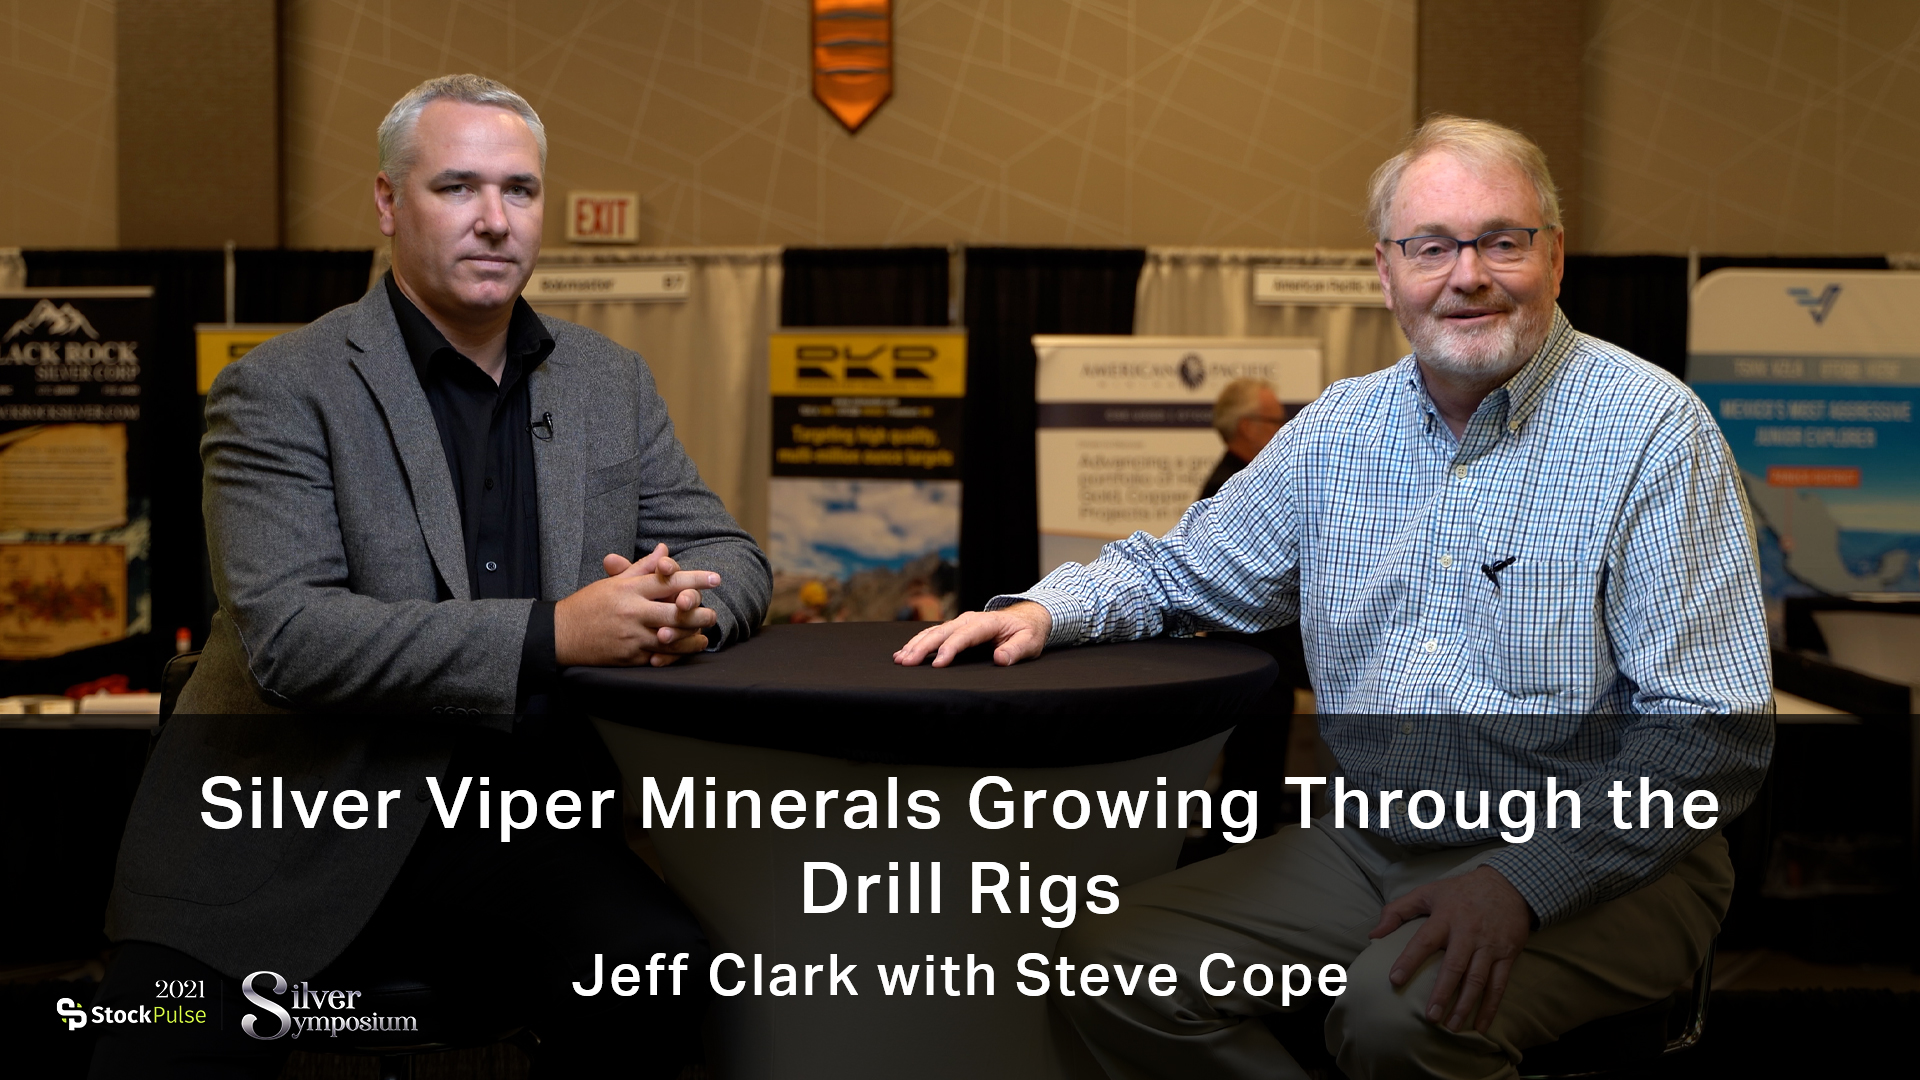 Jeff Clark with Steve Cope: Silver Viper Minerals Growing Through the Drill Rigs